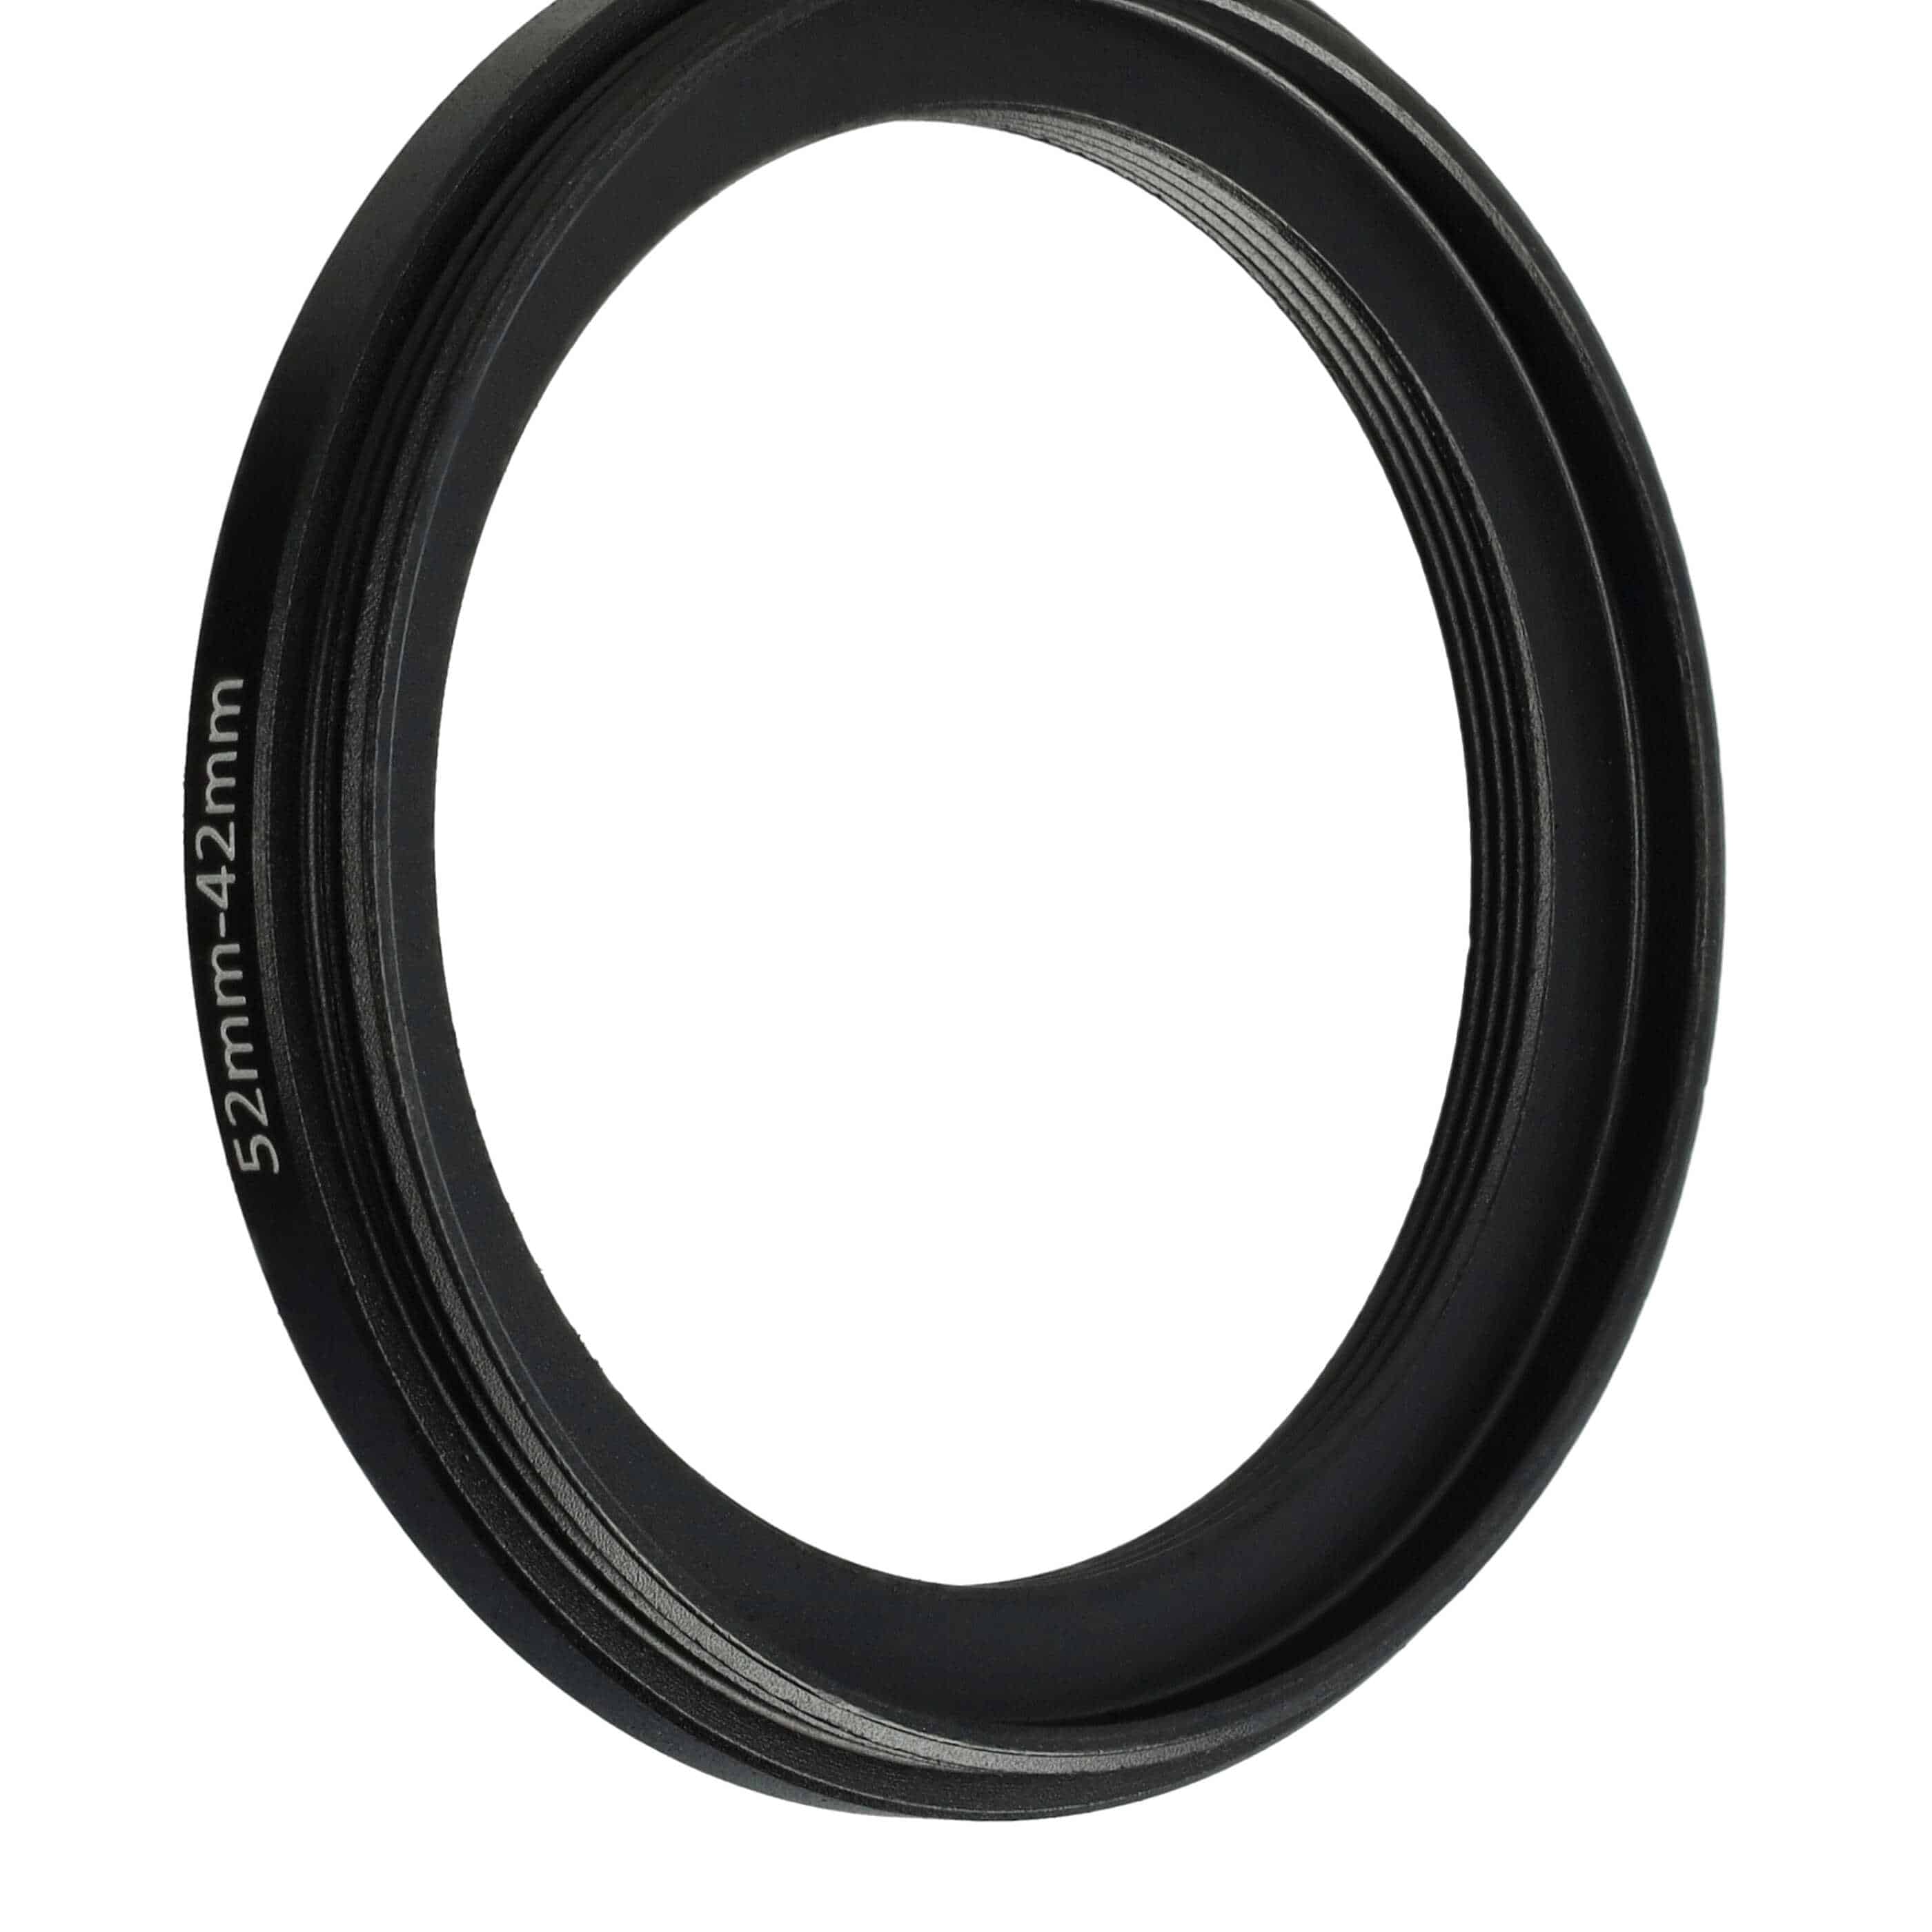 Step-Down Ring Adapter from 52 mm to 42 mm suitable for Camera Lens - Filter Adapter, metal